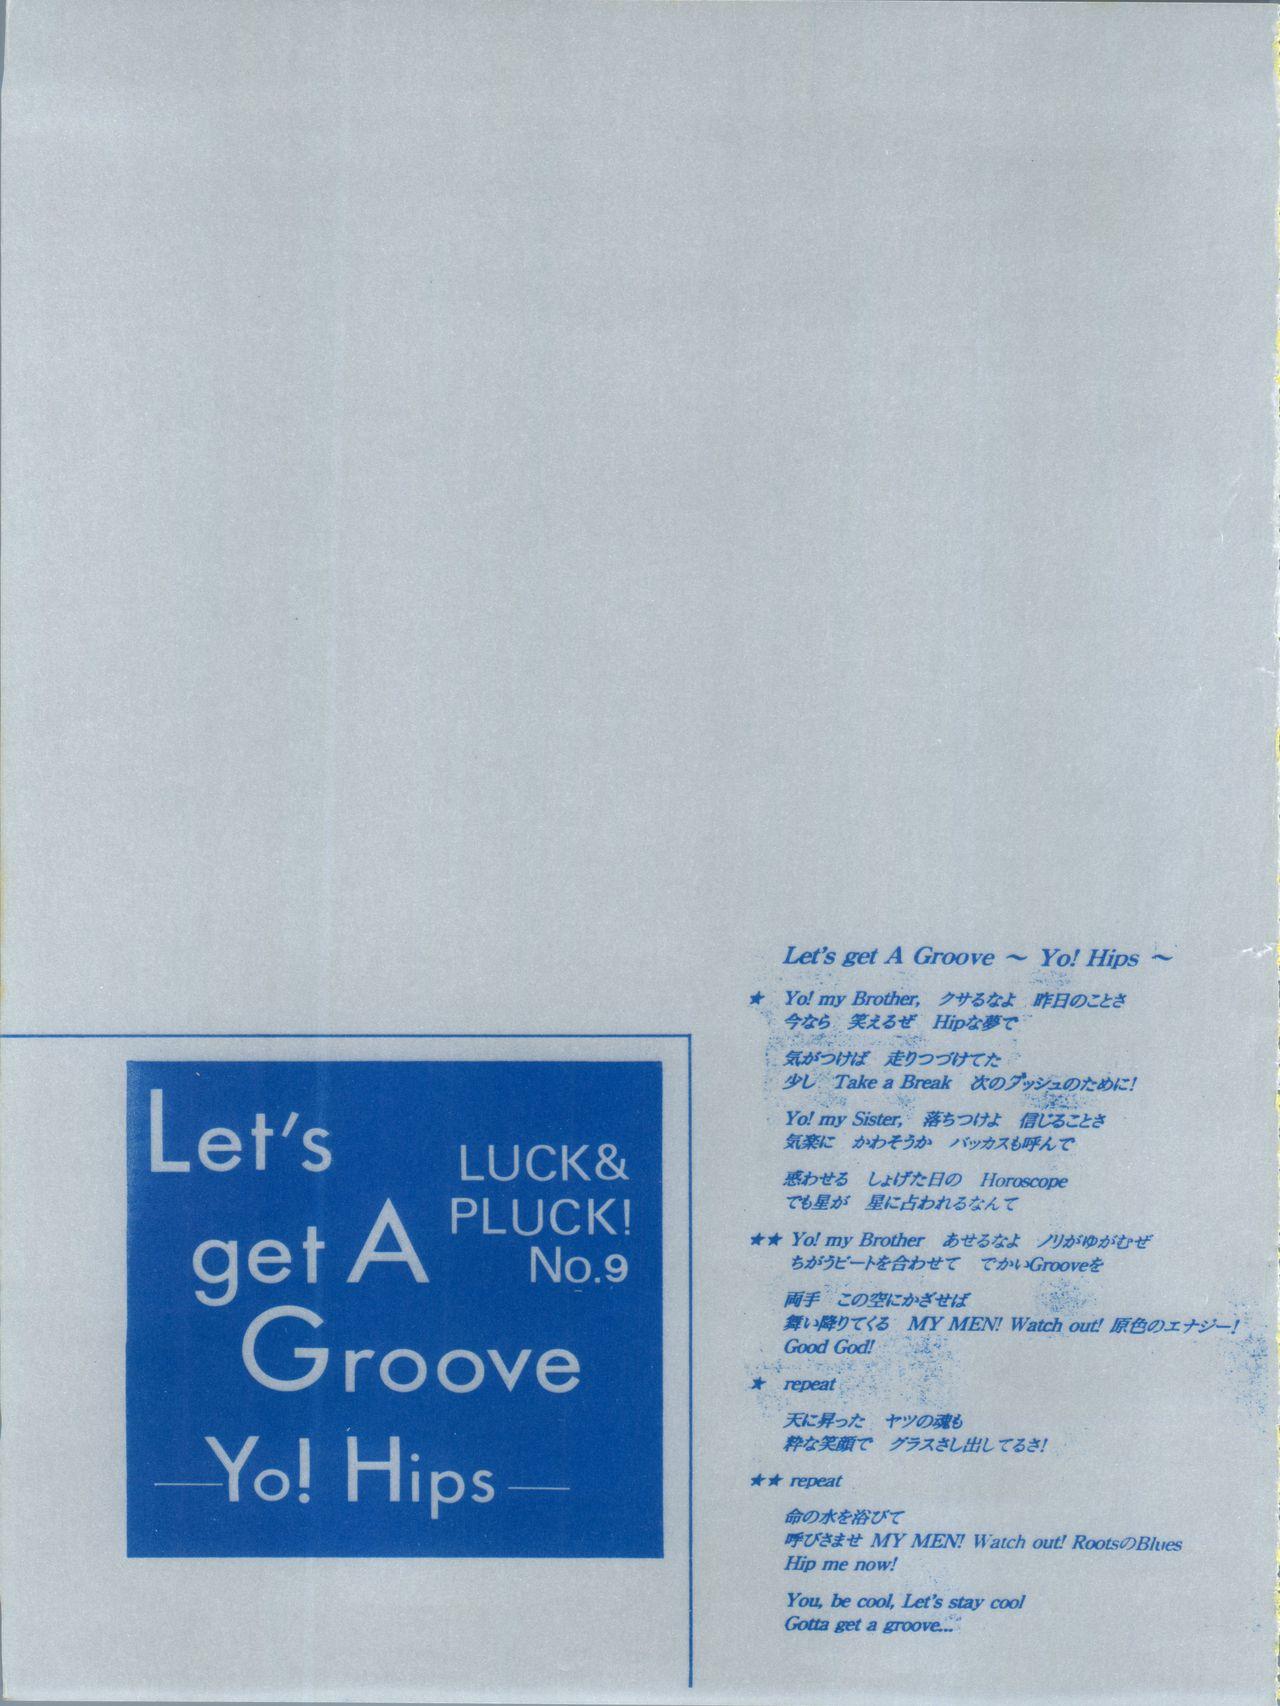 Let's get a Groove 2